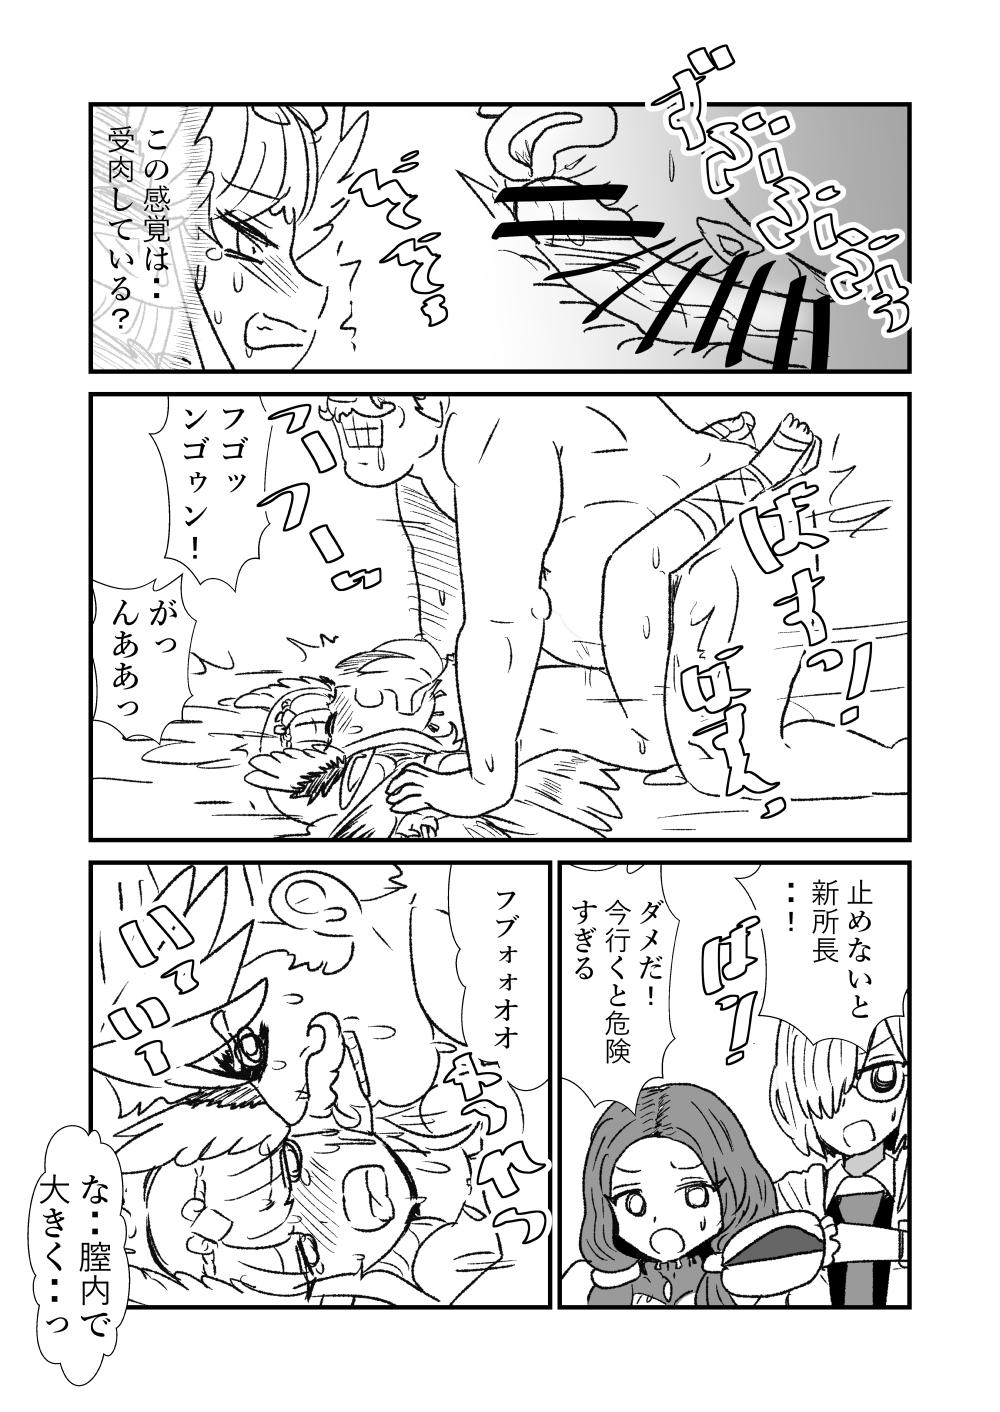 Girl Sucking Dick FPO~桃色林檎の種付け周回～ - Fate grand order Free Hardcore - Page 6